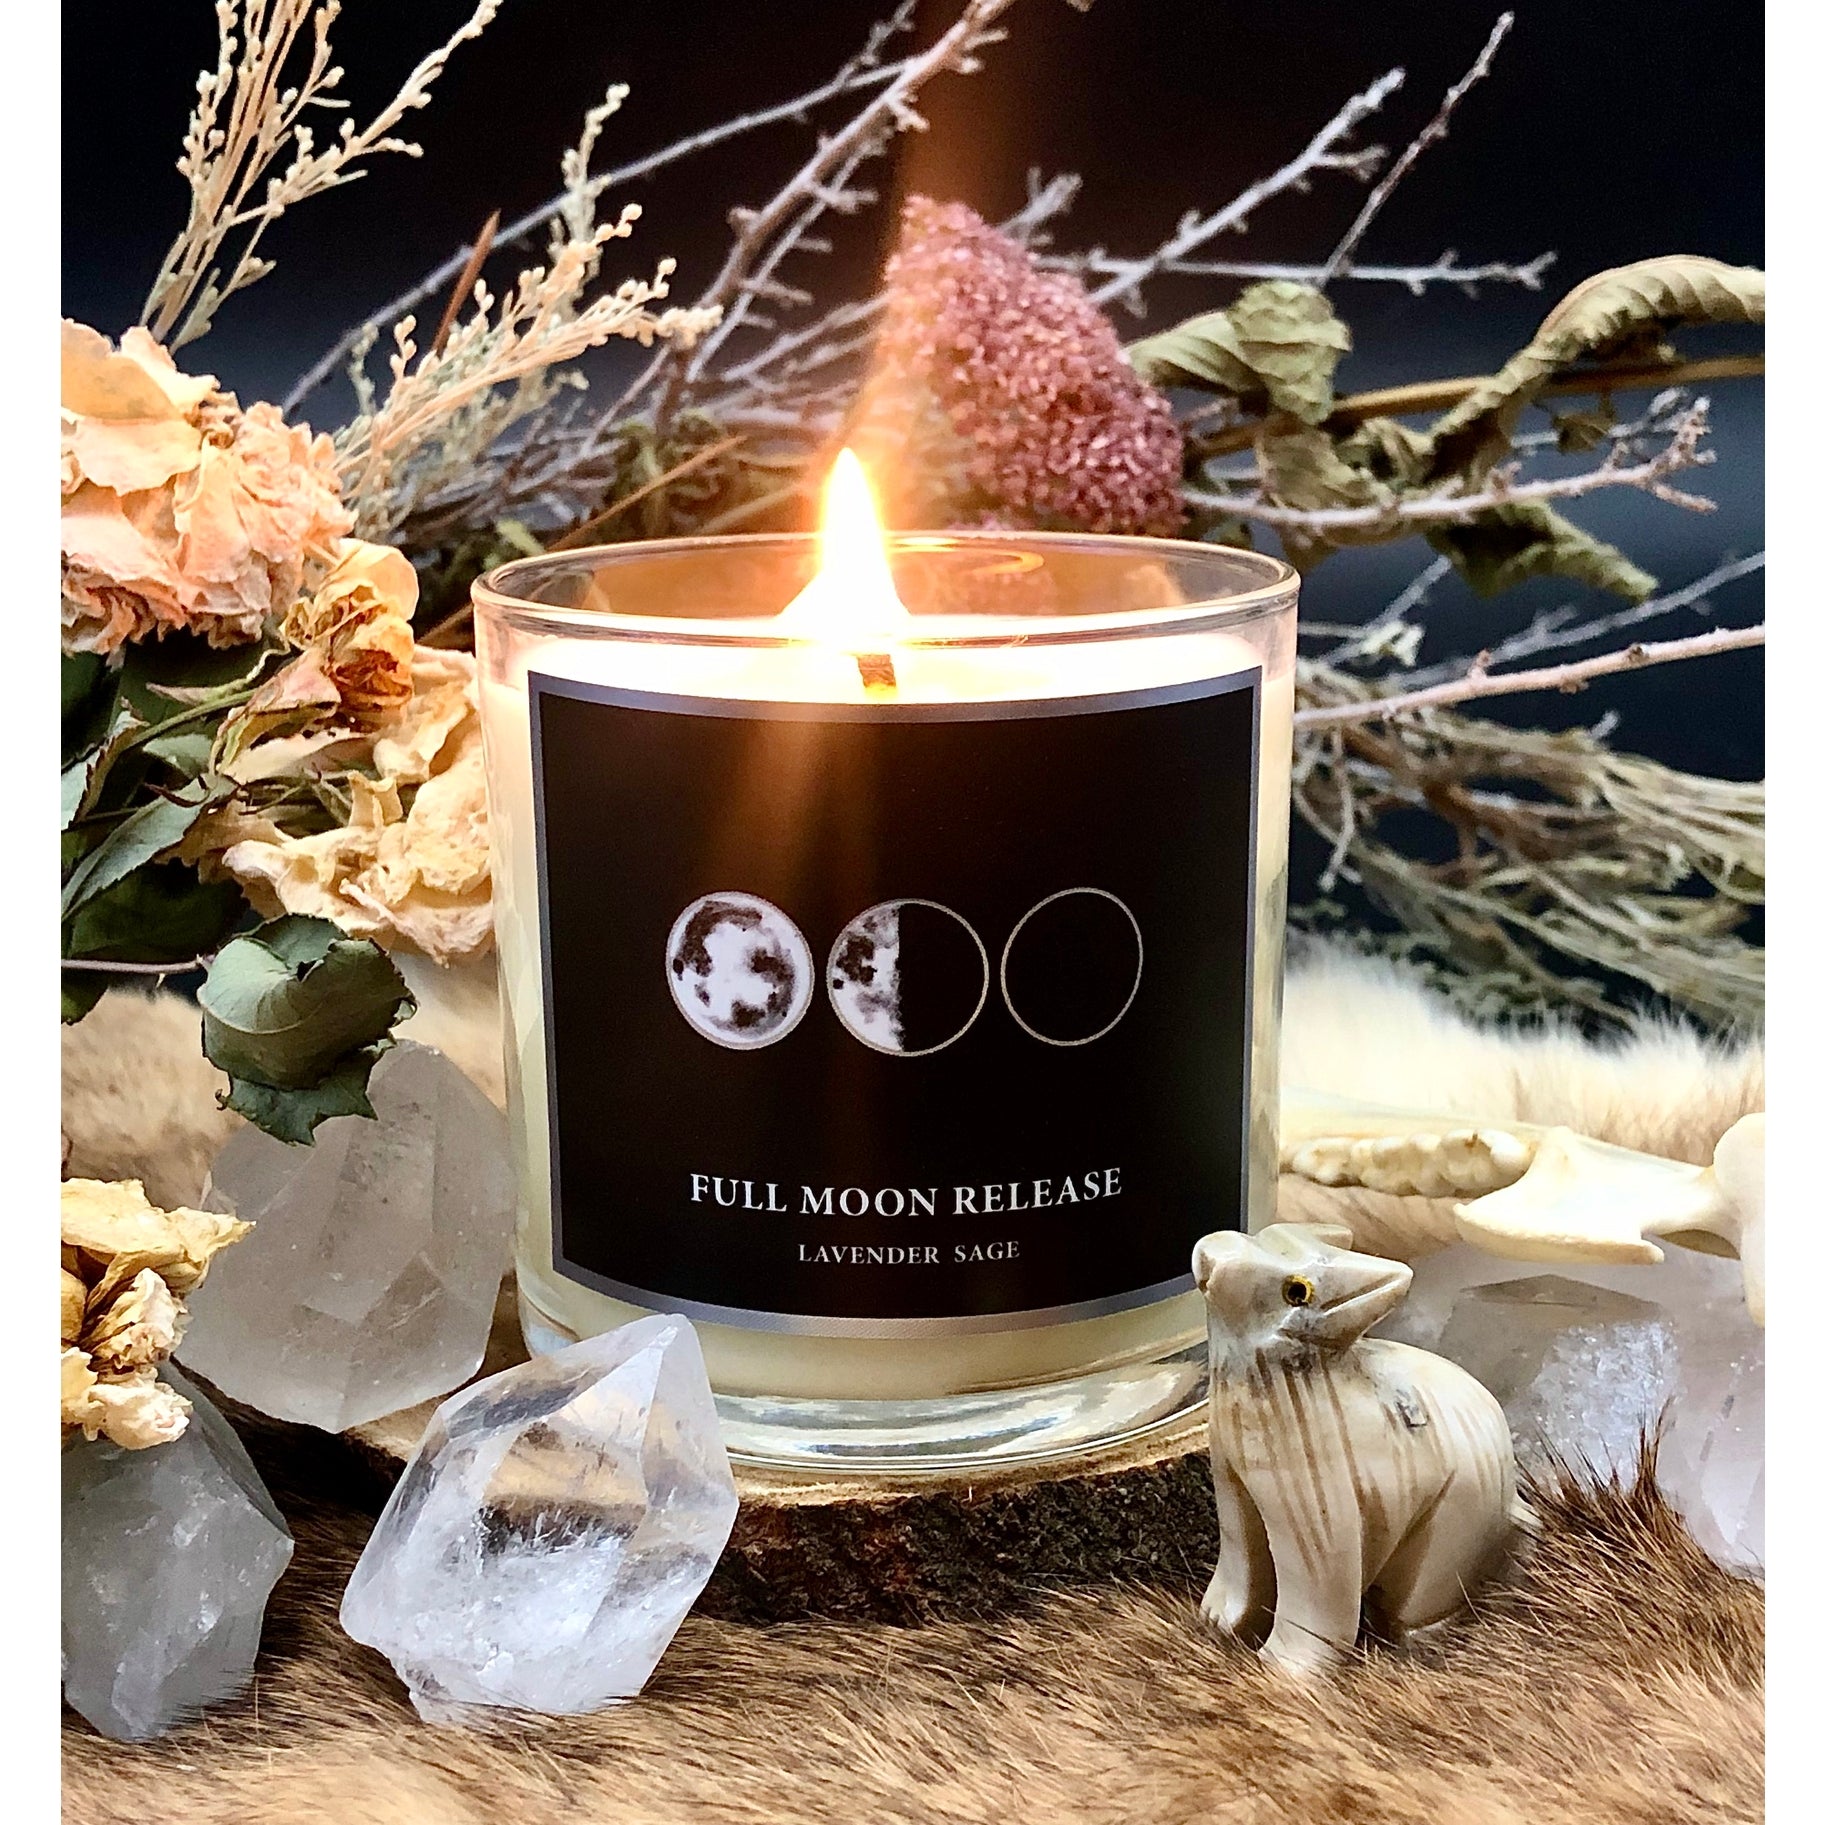 Full Moon Release Body Oil Candle